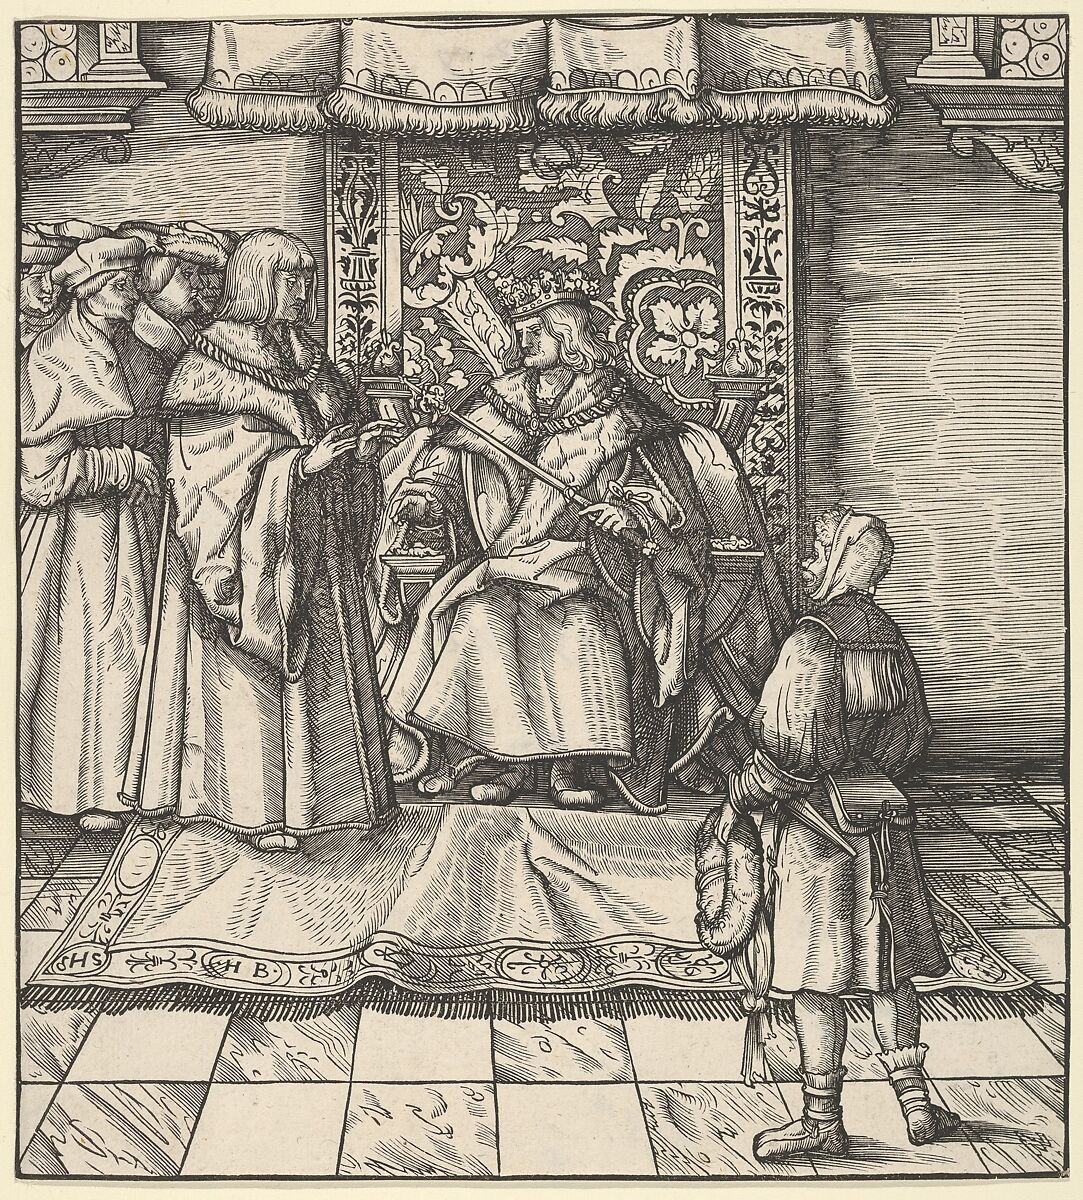 The Blue King's Council to Attack the White King by Surprise, from Der Weisskunig, Hans Burgkmair (German, Augsburg 1473–1531 Augsburg), Woodcut; proof (Hollstein) 